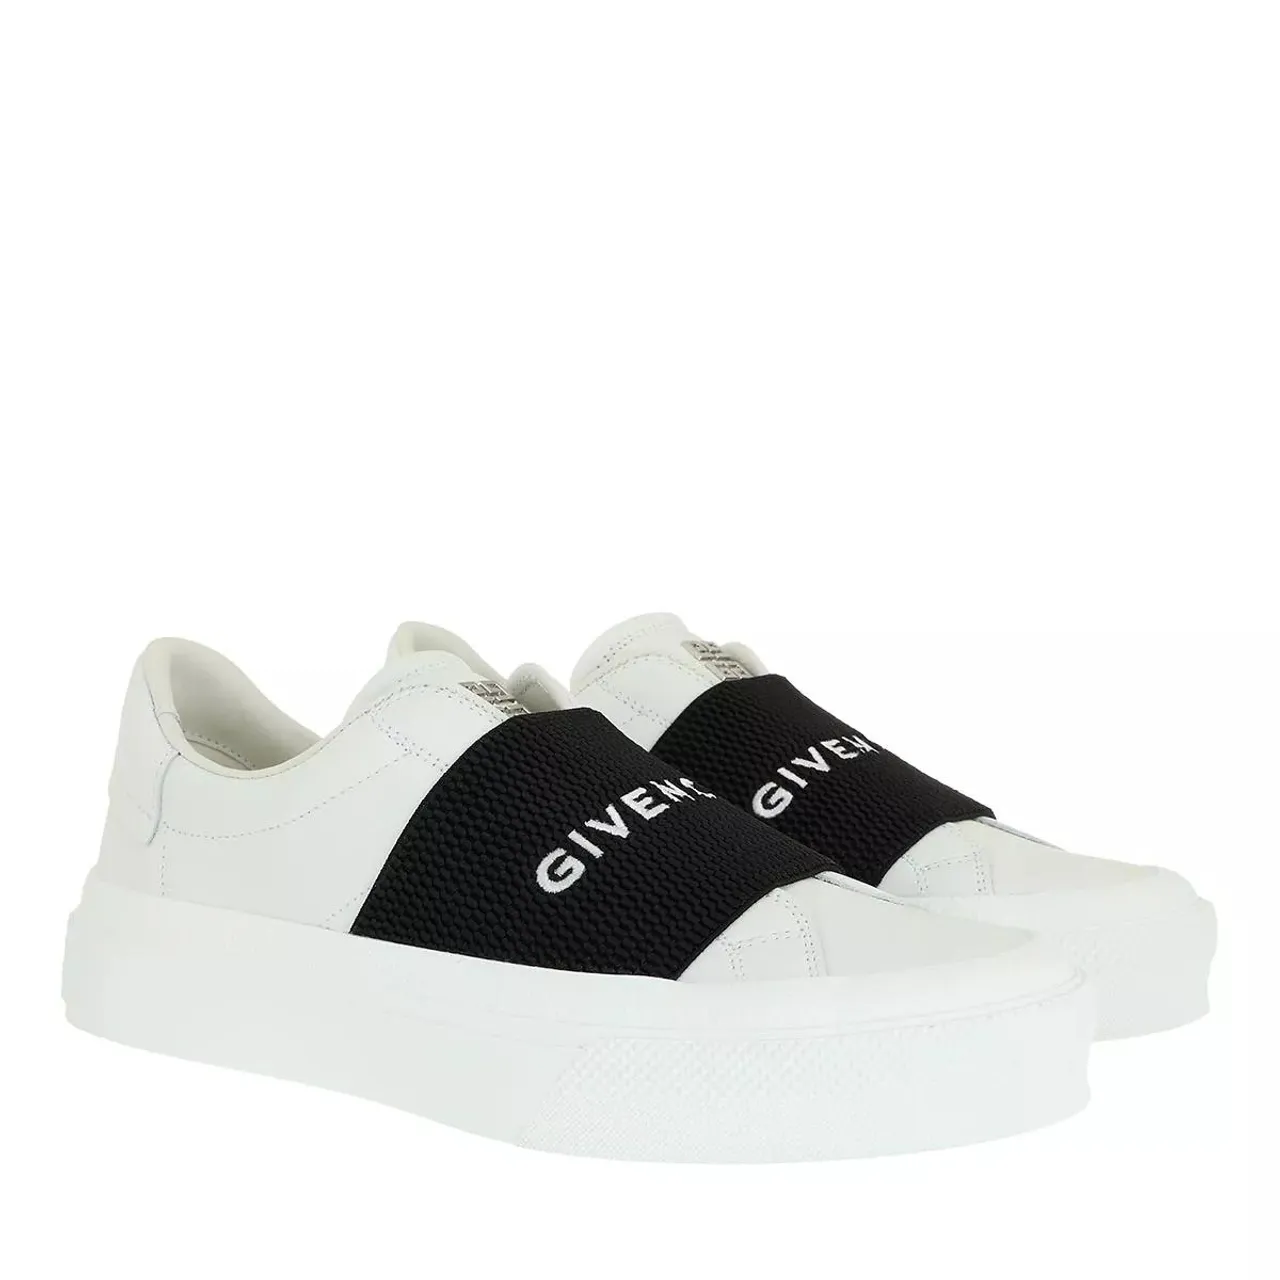 Givenchy Sneakers - Slip On Sneakers